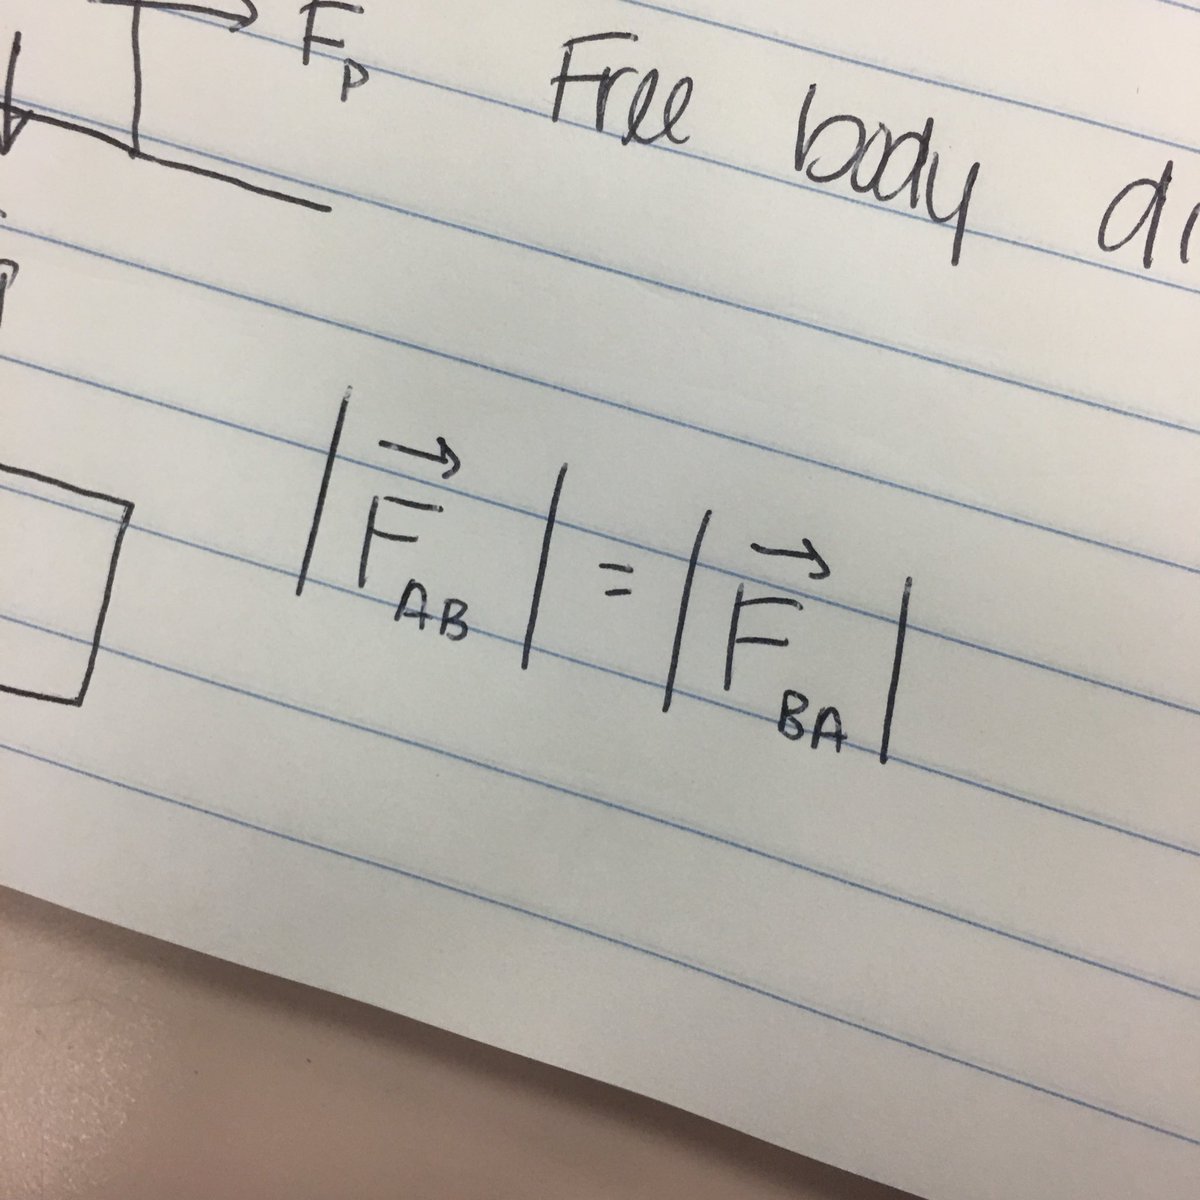 RT @CollinsDiamonds: when FAB shows up in physics and @iamjojo instantly starts playing in your head https://t.co/Wr4QLvjyXd